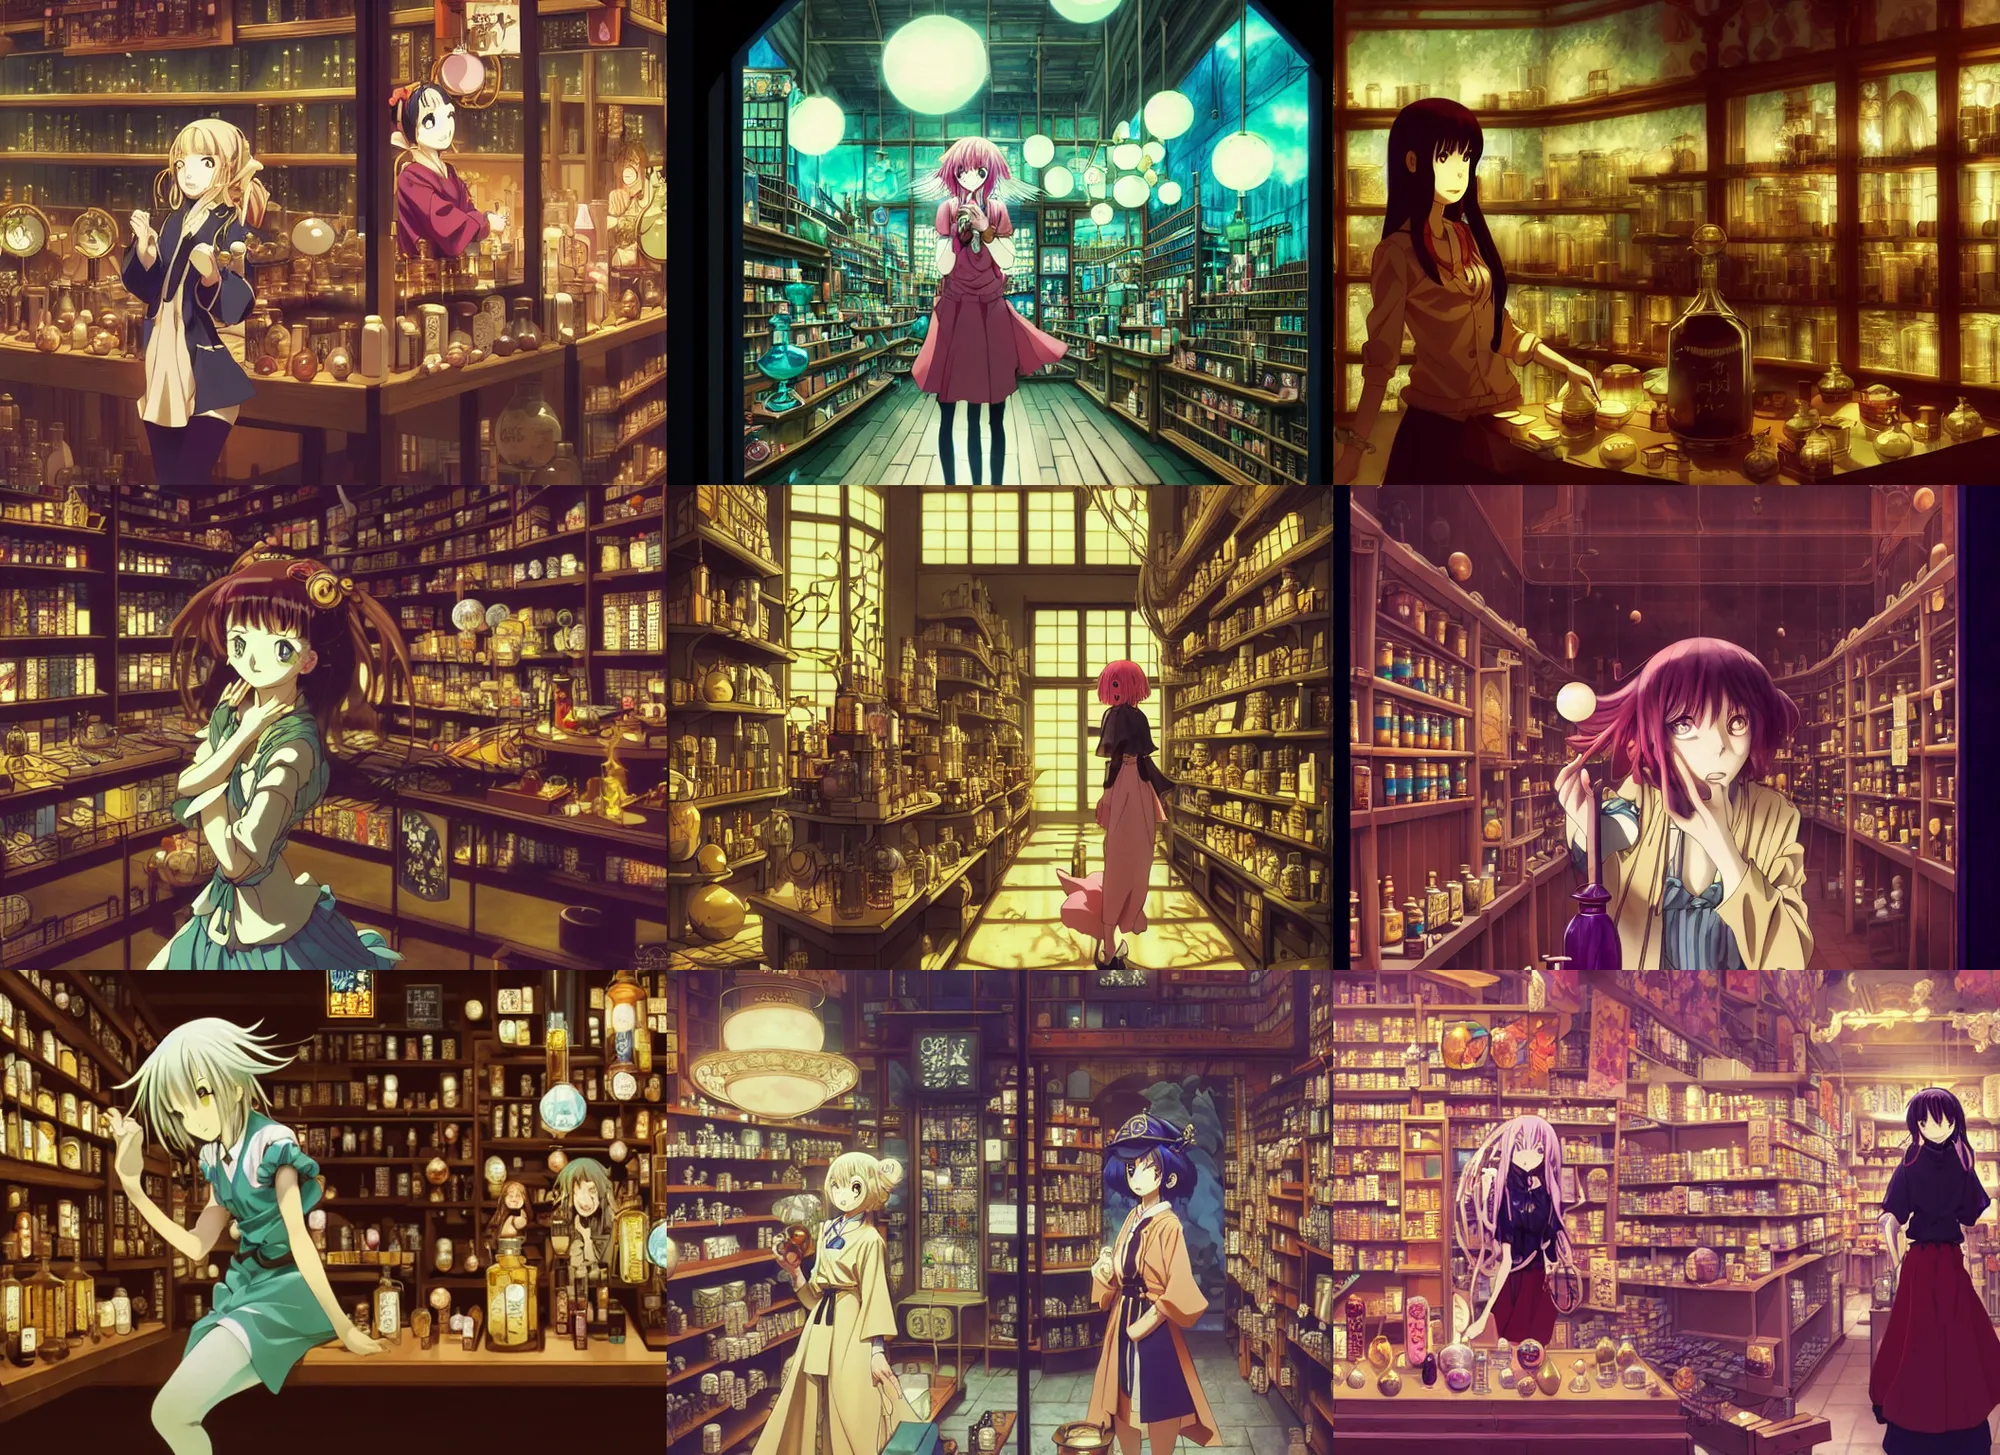 Prompt: lomography, anime, portrait of a young woman in a alchemist's potion shop interior shopping, glowing, haruhiko mikimoto, hisashi eguchi, katsuhiro otomo, dynamic pose and perspective, dramatic lighting, detailed facial features, yoshinari yoh